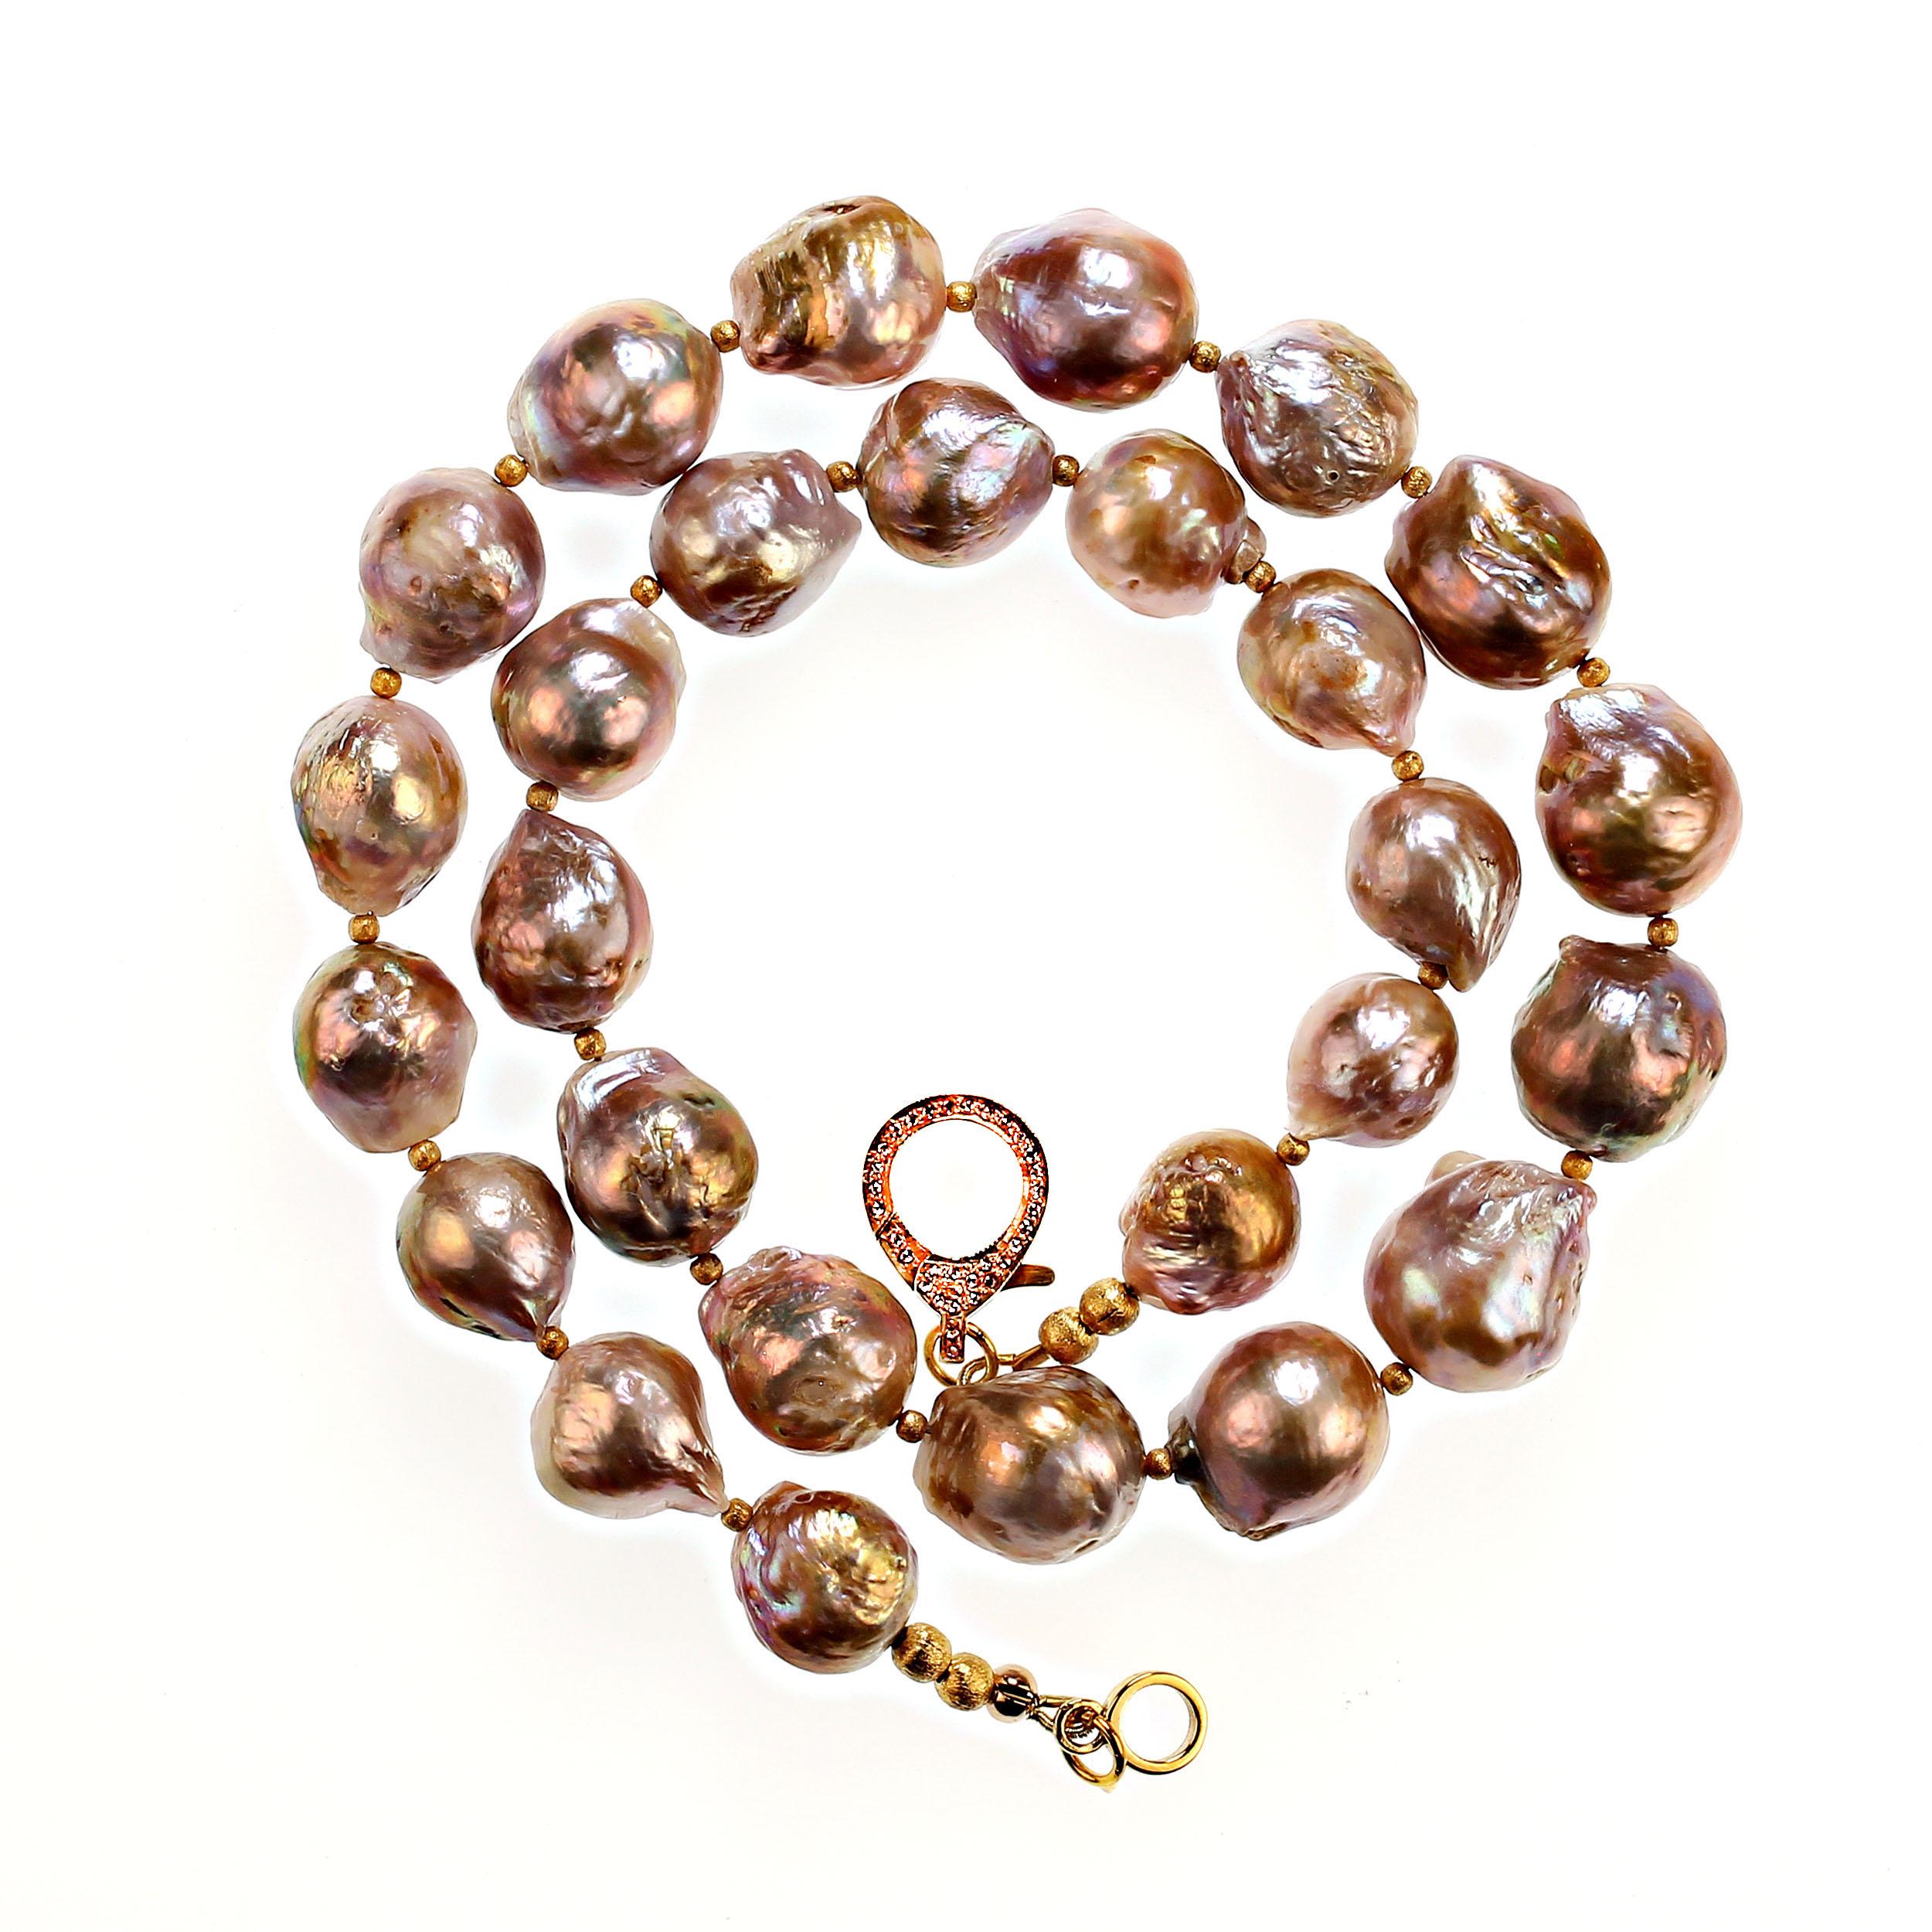 Artisan AJD 21 Inch Elegant Gold Baroque Pearl necklace with goldy accents Great Gift! For Sale